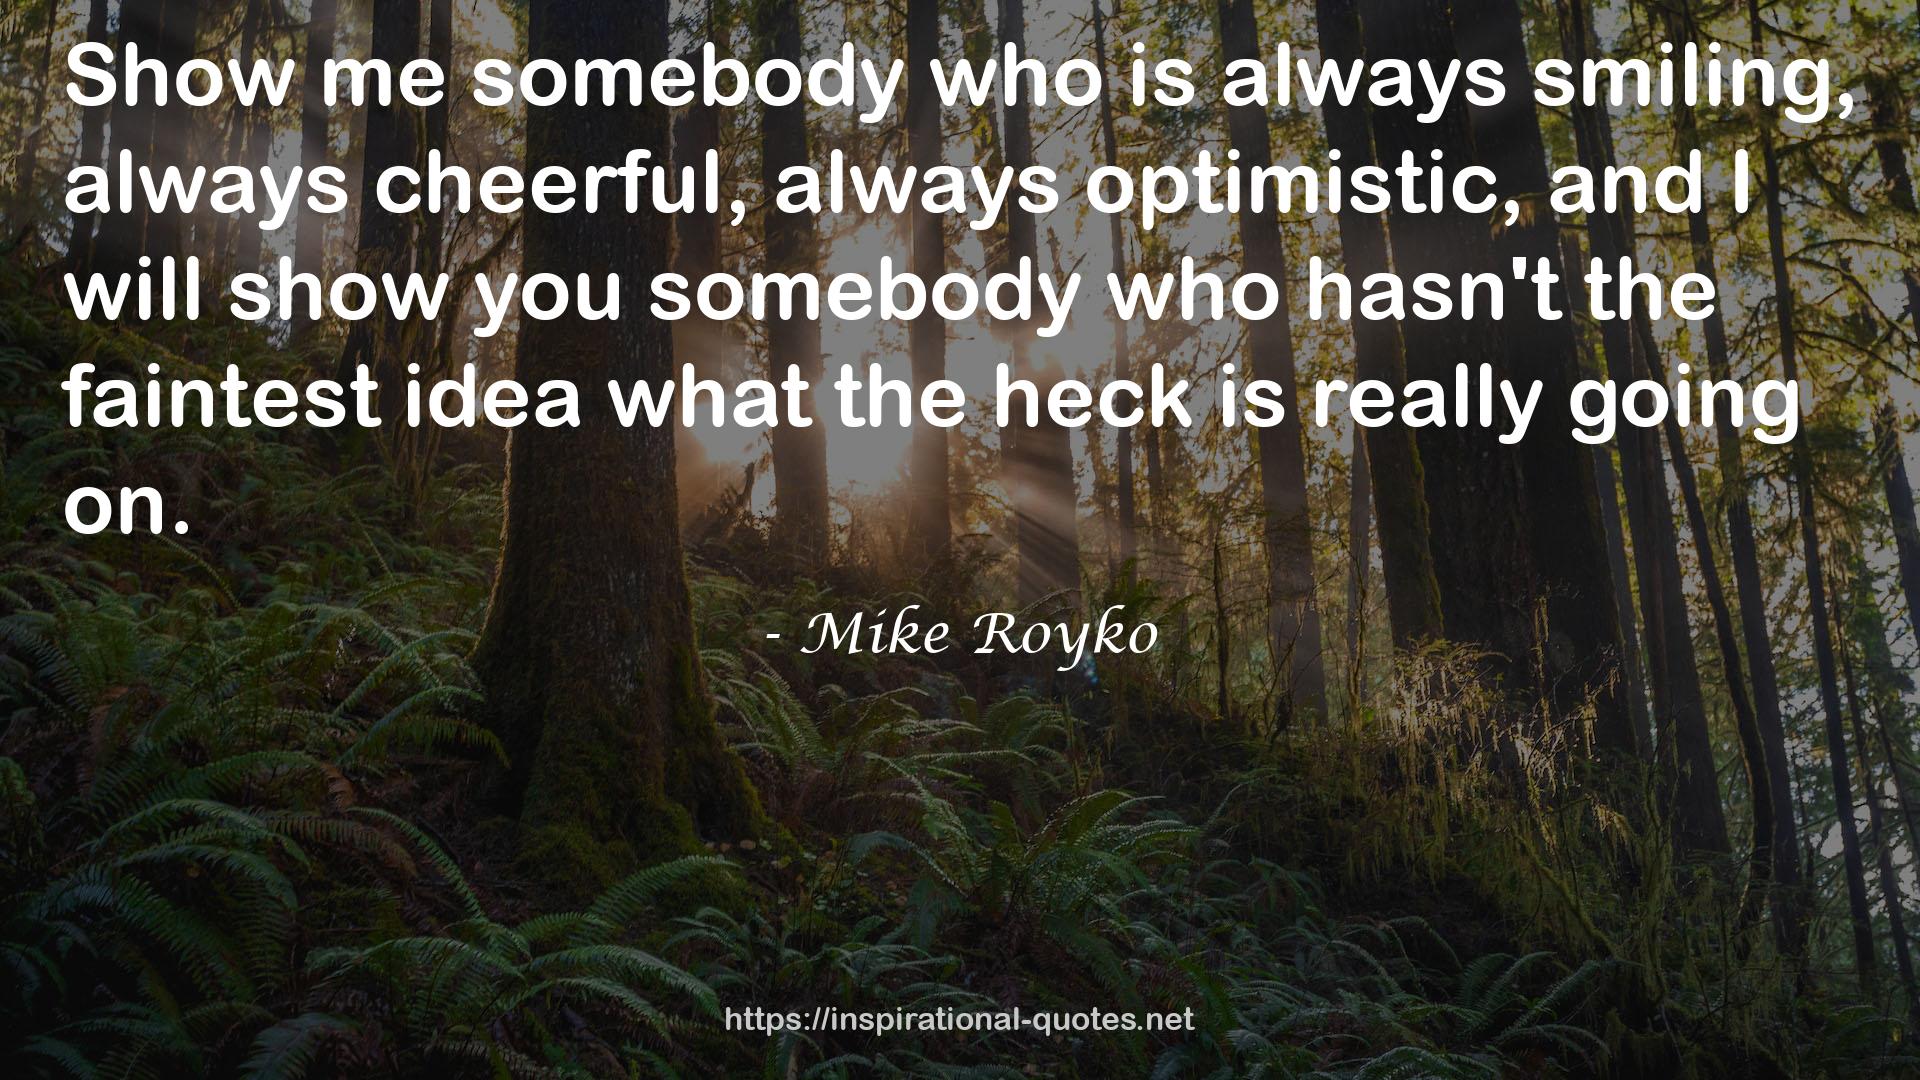 Mike Royko QUOTES